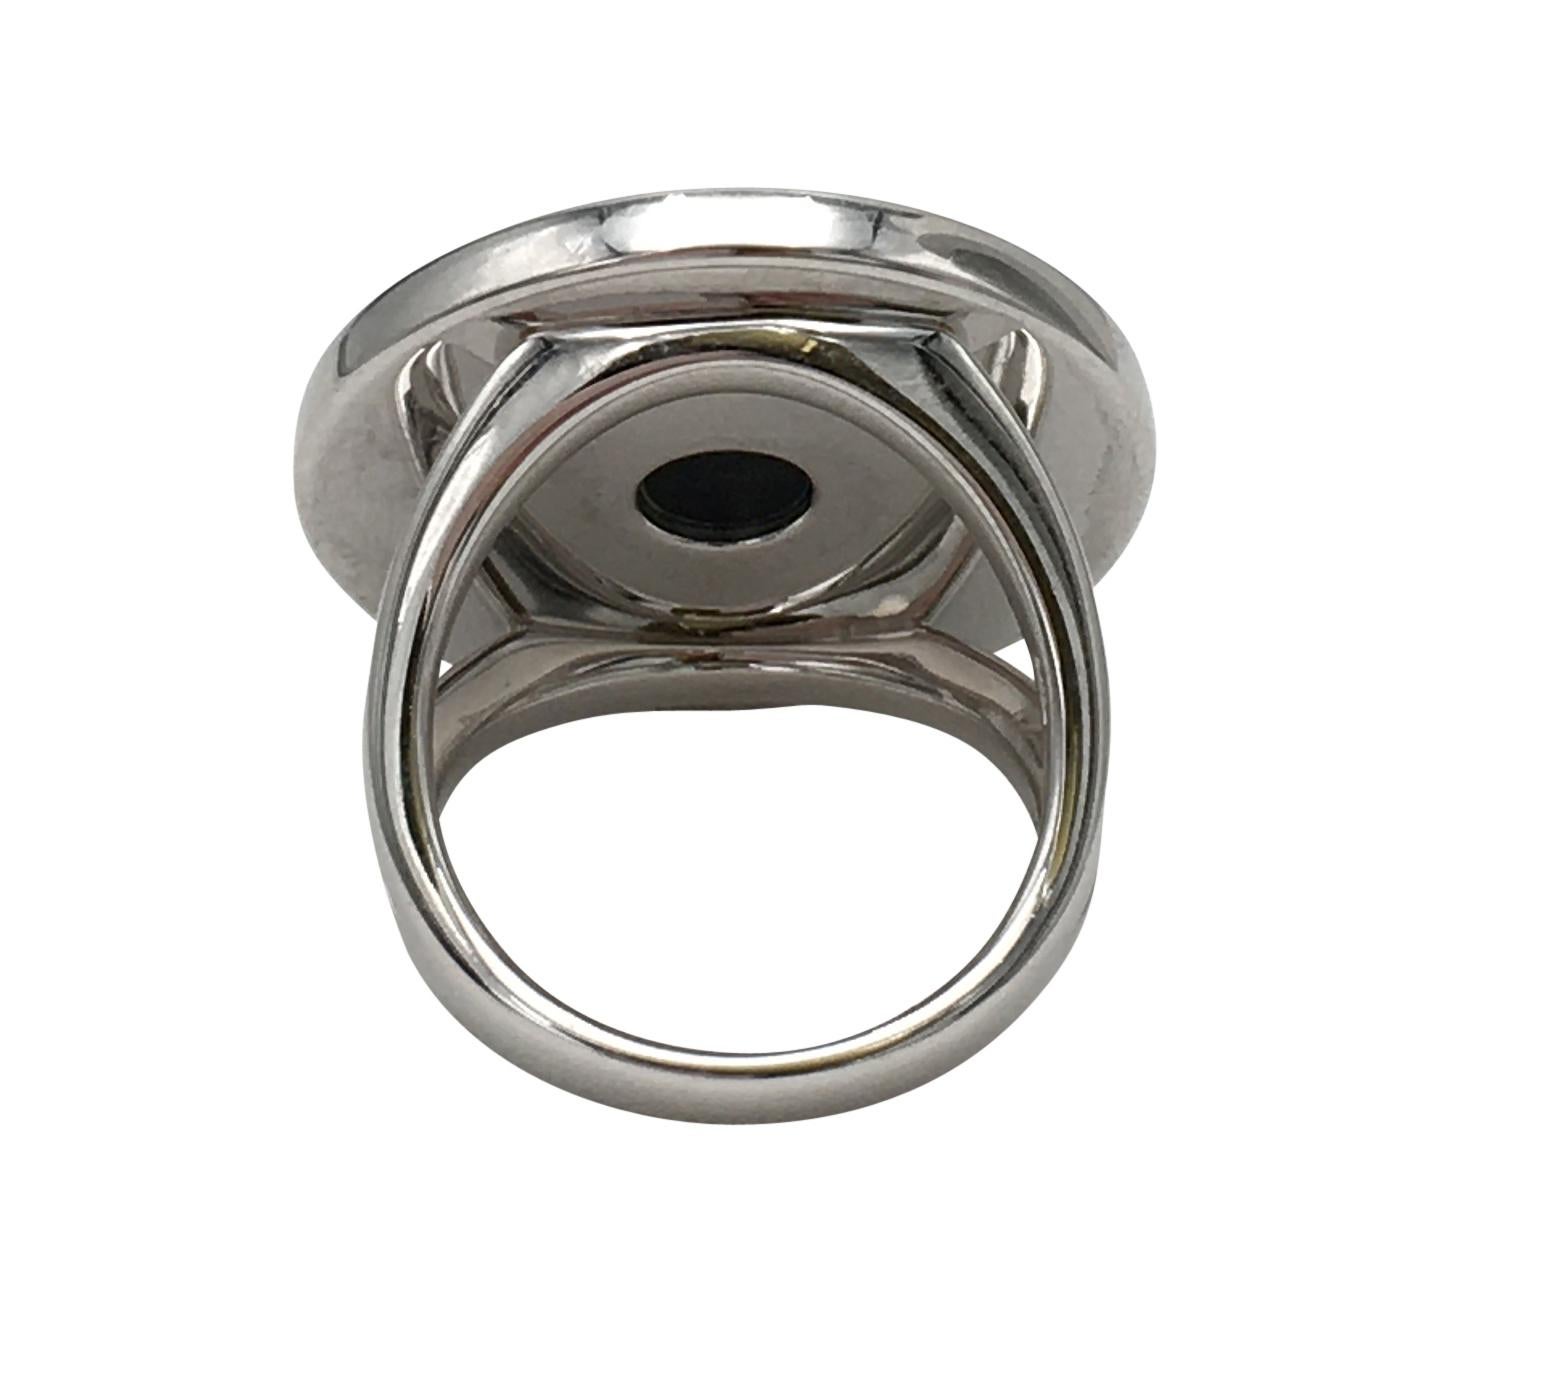 Authentic Bulgari ring crafted in 18 karat white gold featuring a round onyx disk at the center.  The onyx disk measures 16mm while the ring itself measures 24mm.  Size 52 (US size 6). Signed Bulgari, 750, Made in Itlay, 52.  The ring is accompanied